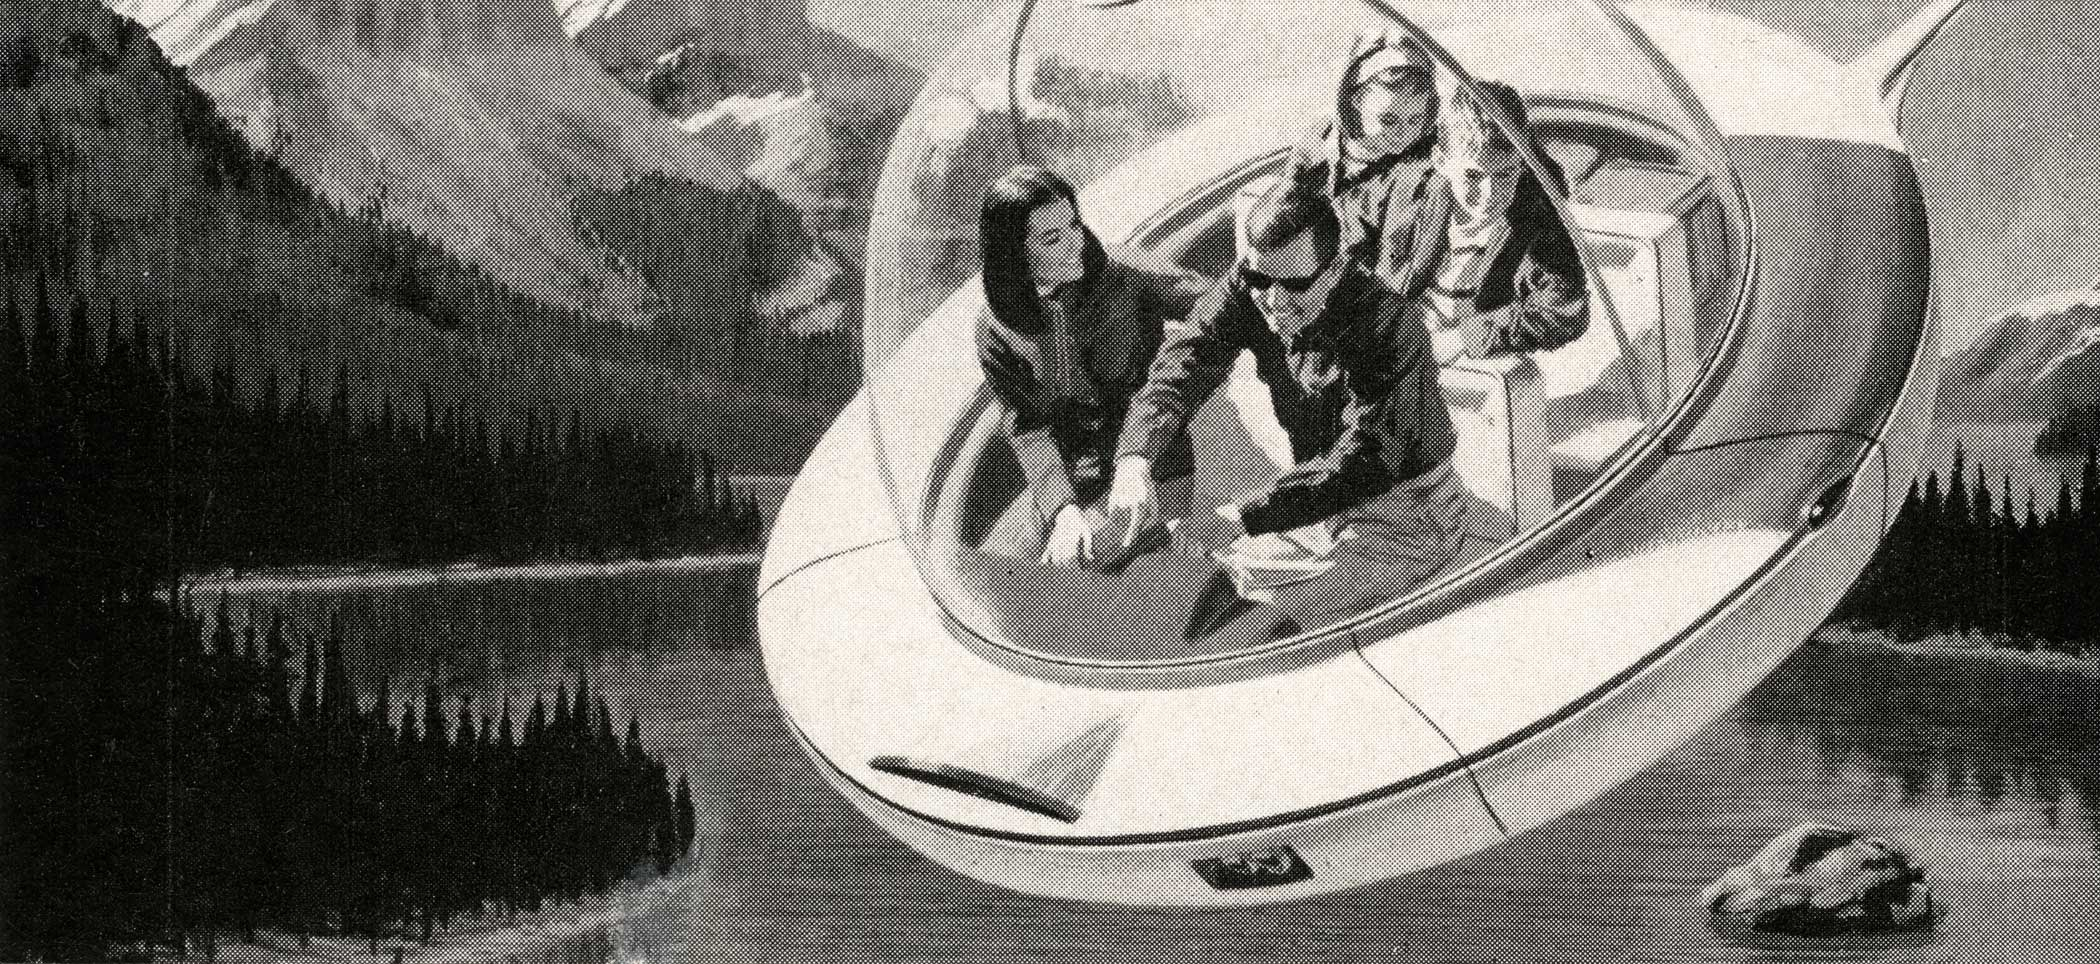 Vintage illustration of a futuristic American family on vacation, with the father driving his wife and two kids in a flying saucer instead of a car, 1950s.